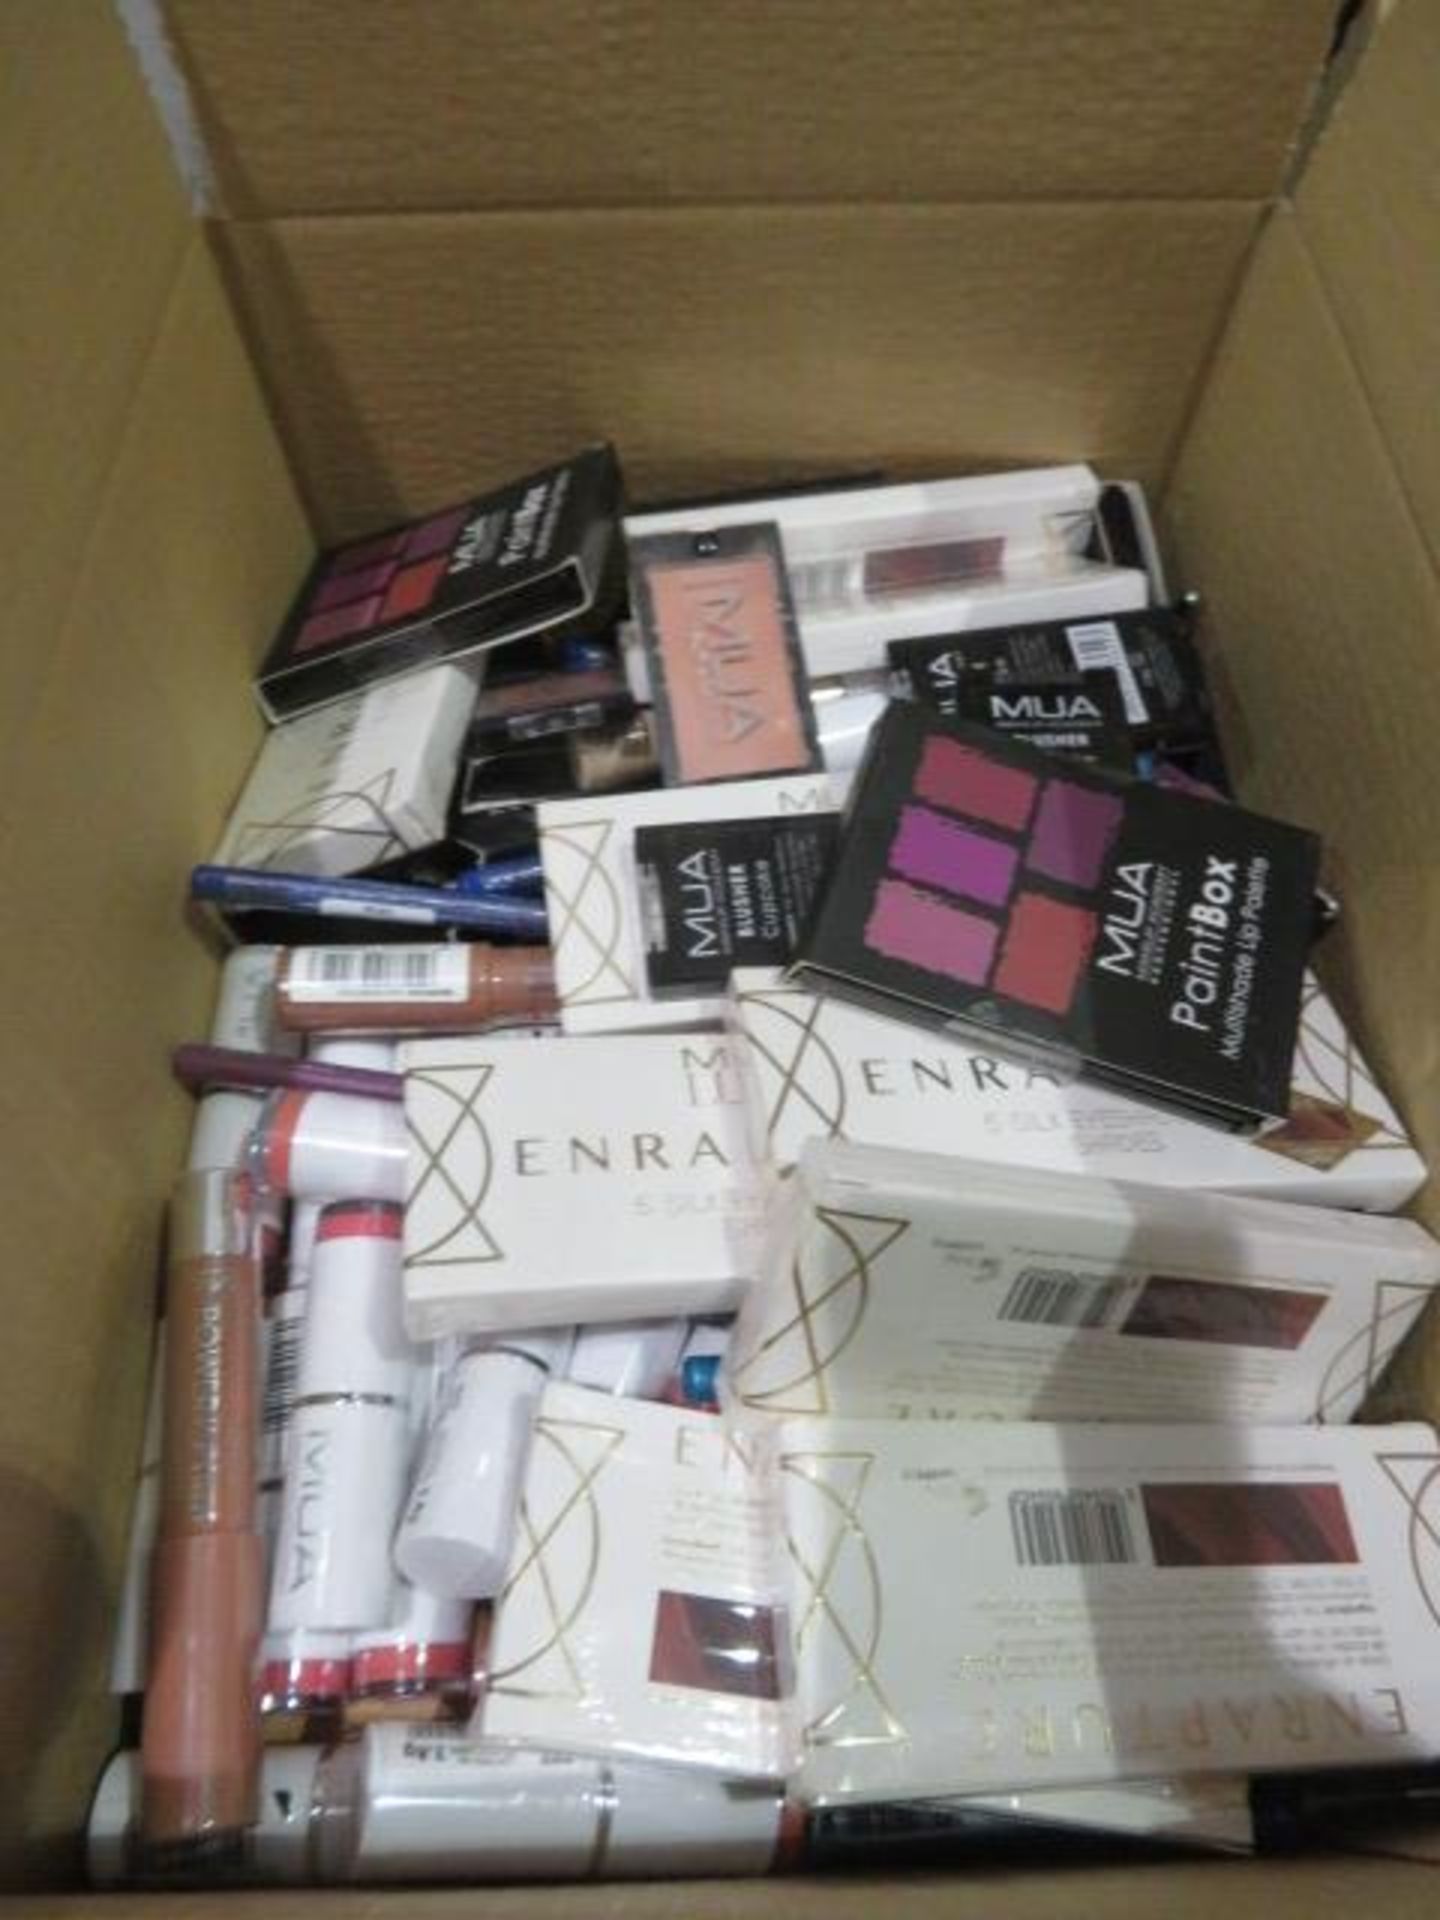 Circa. 200 items of various new make up acadamy make up to include: lipstick, enchanted 5 silk ...